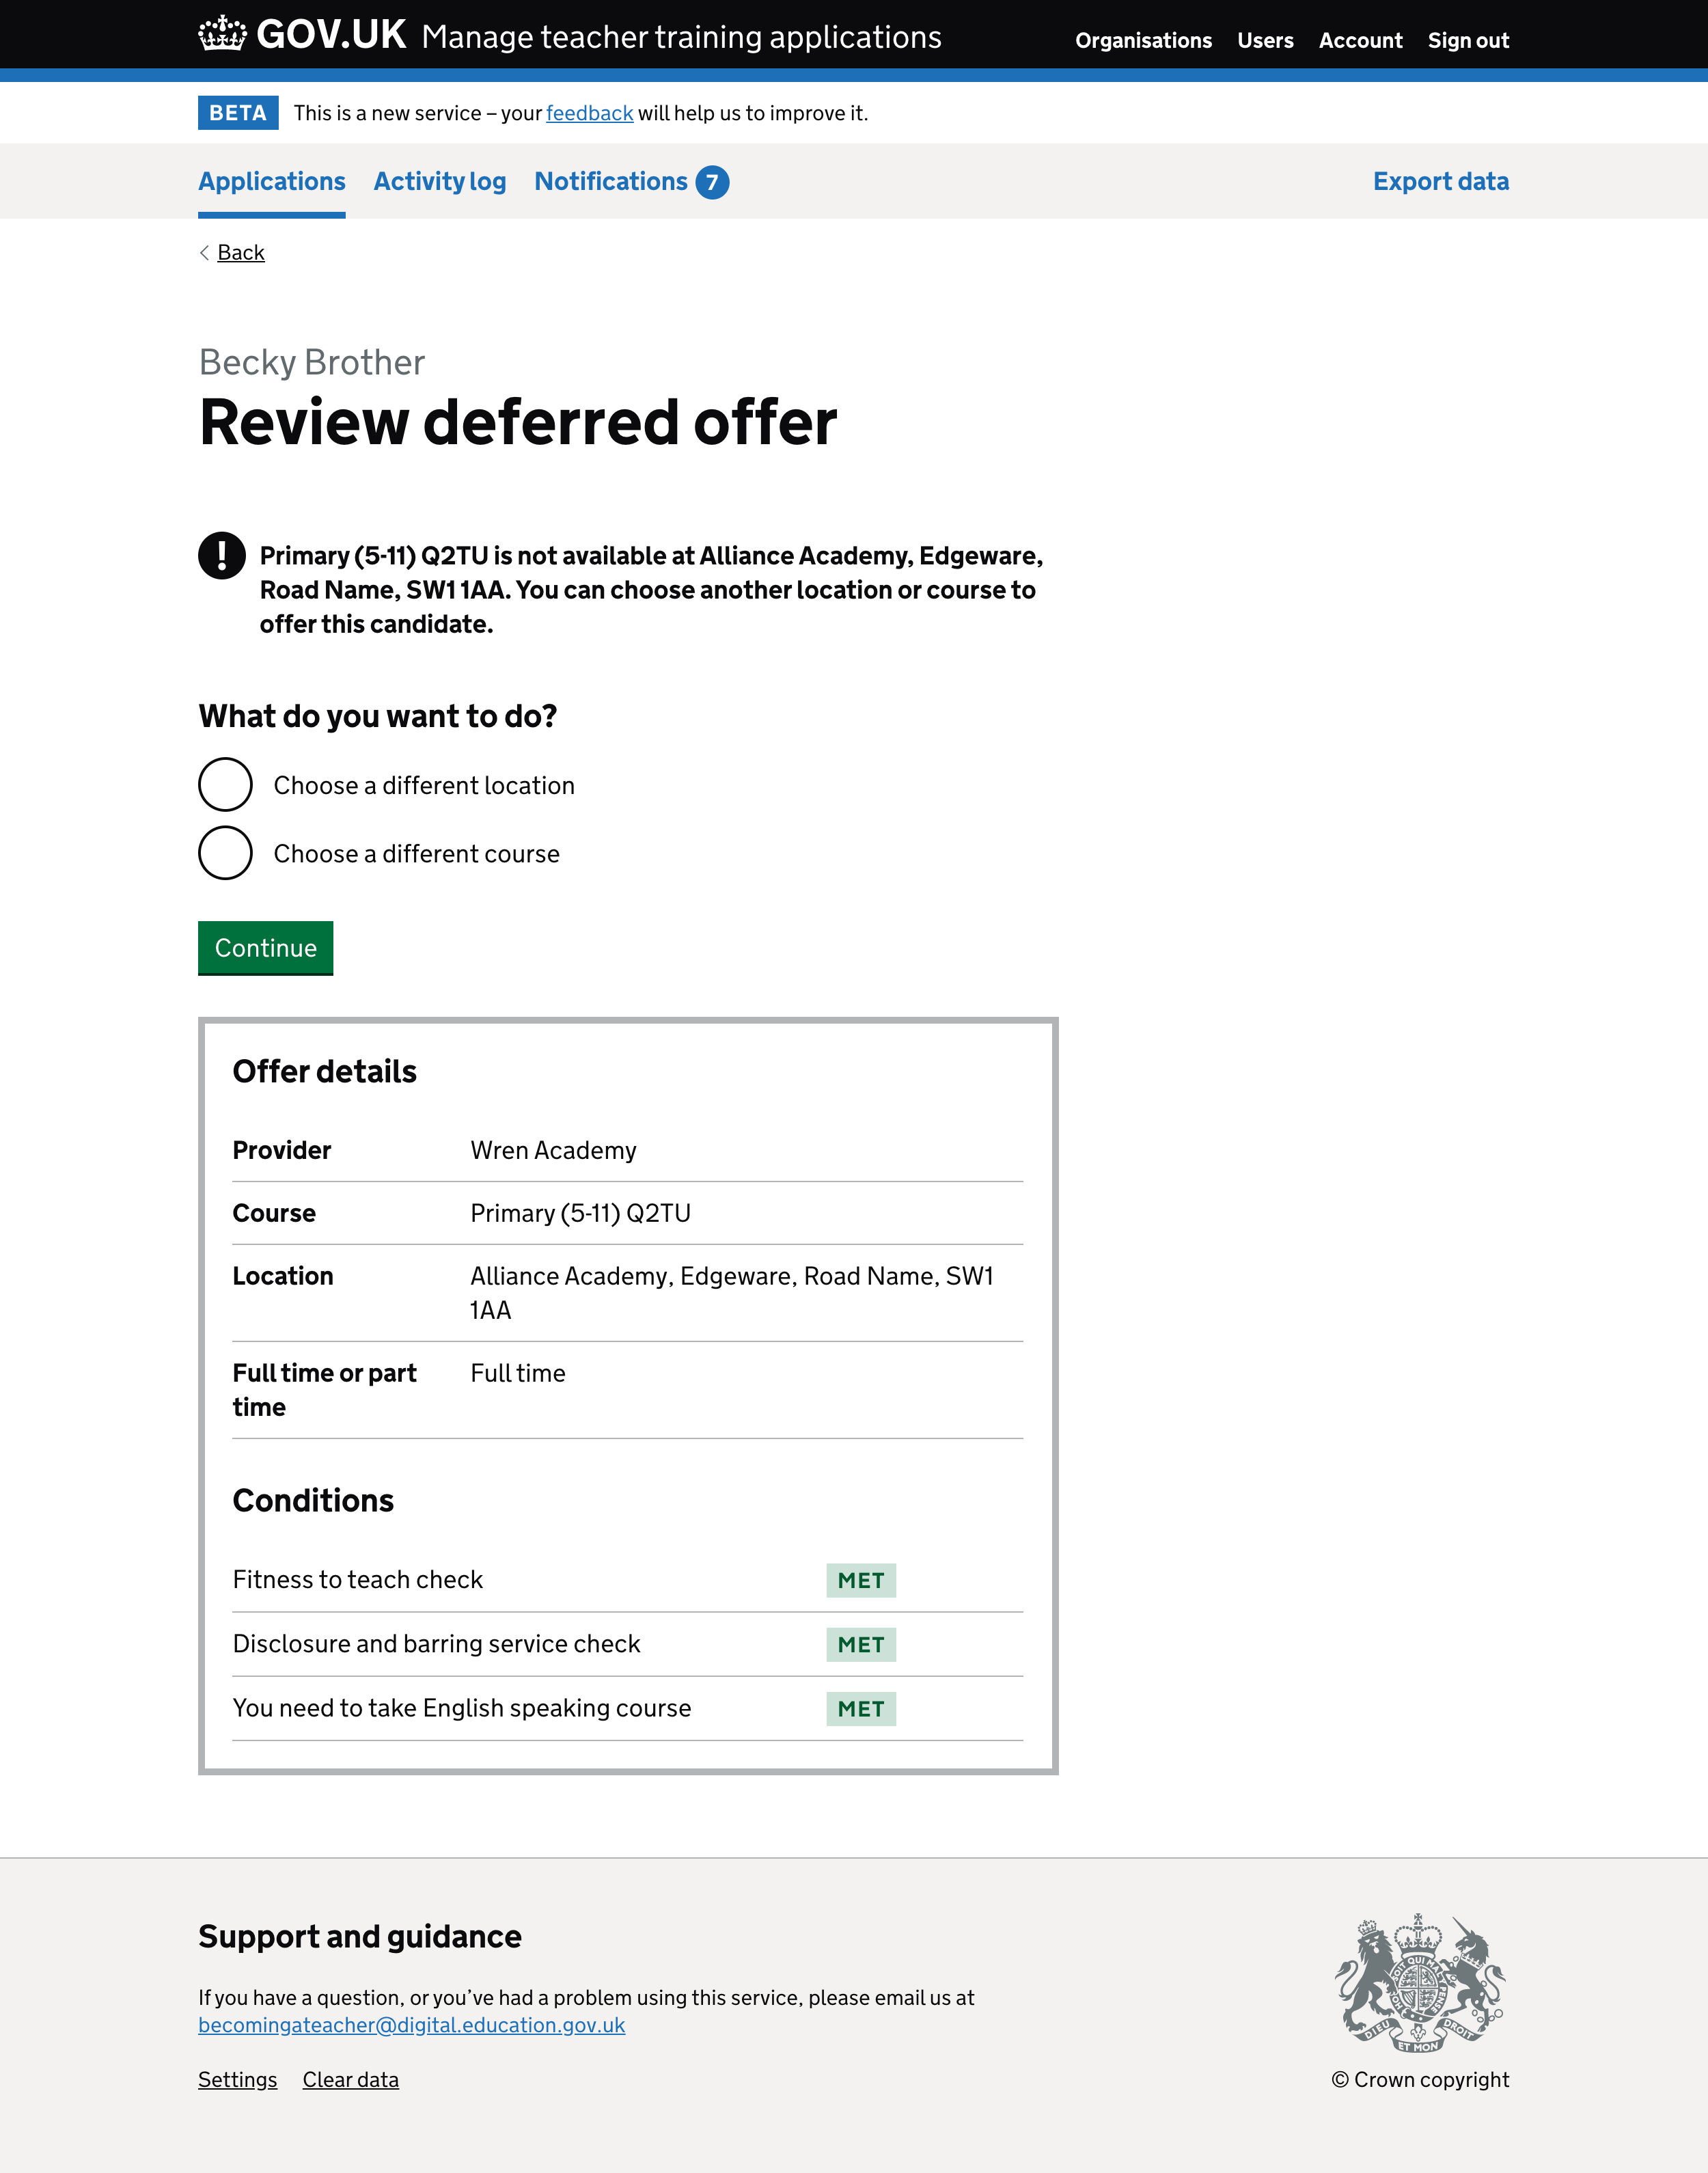 Screenshot of ‘Review deferred offer’ page with a warning about the location.